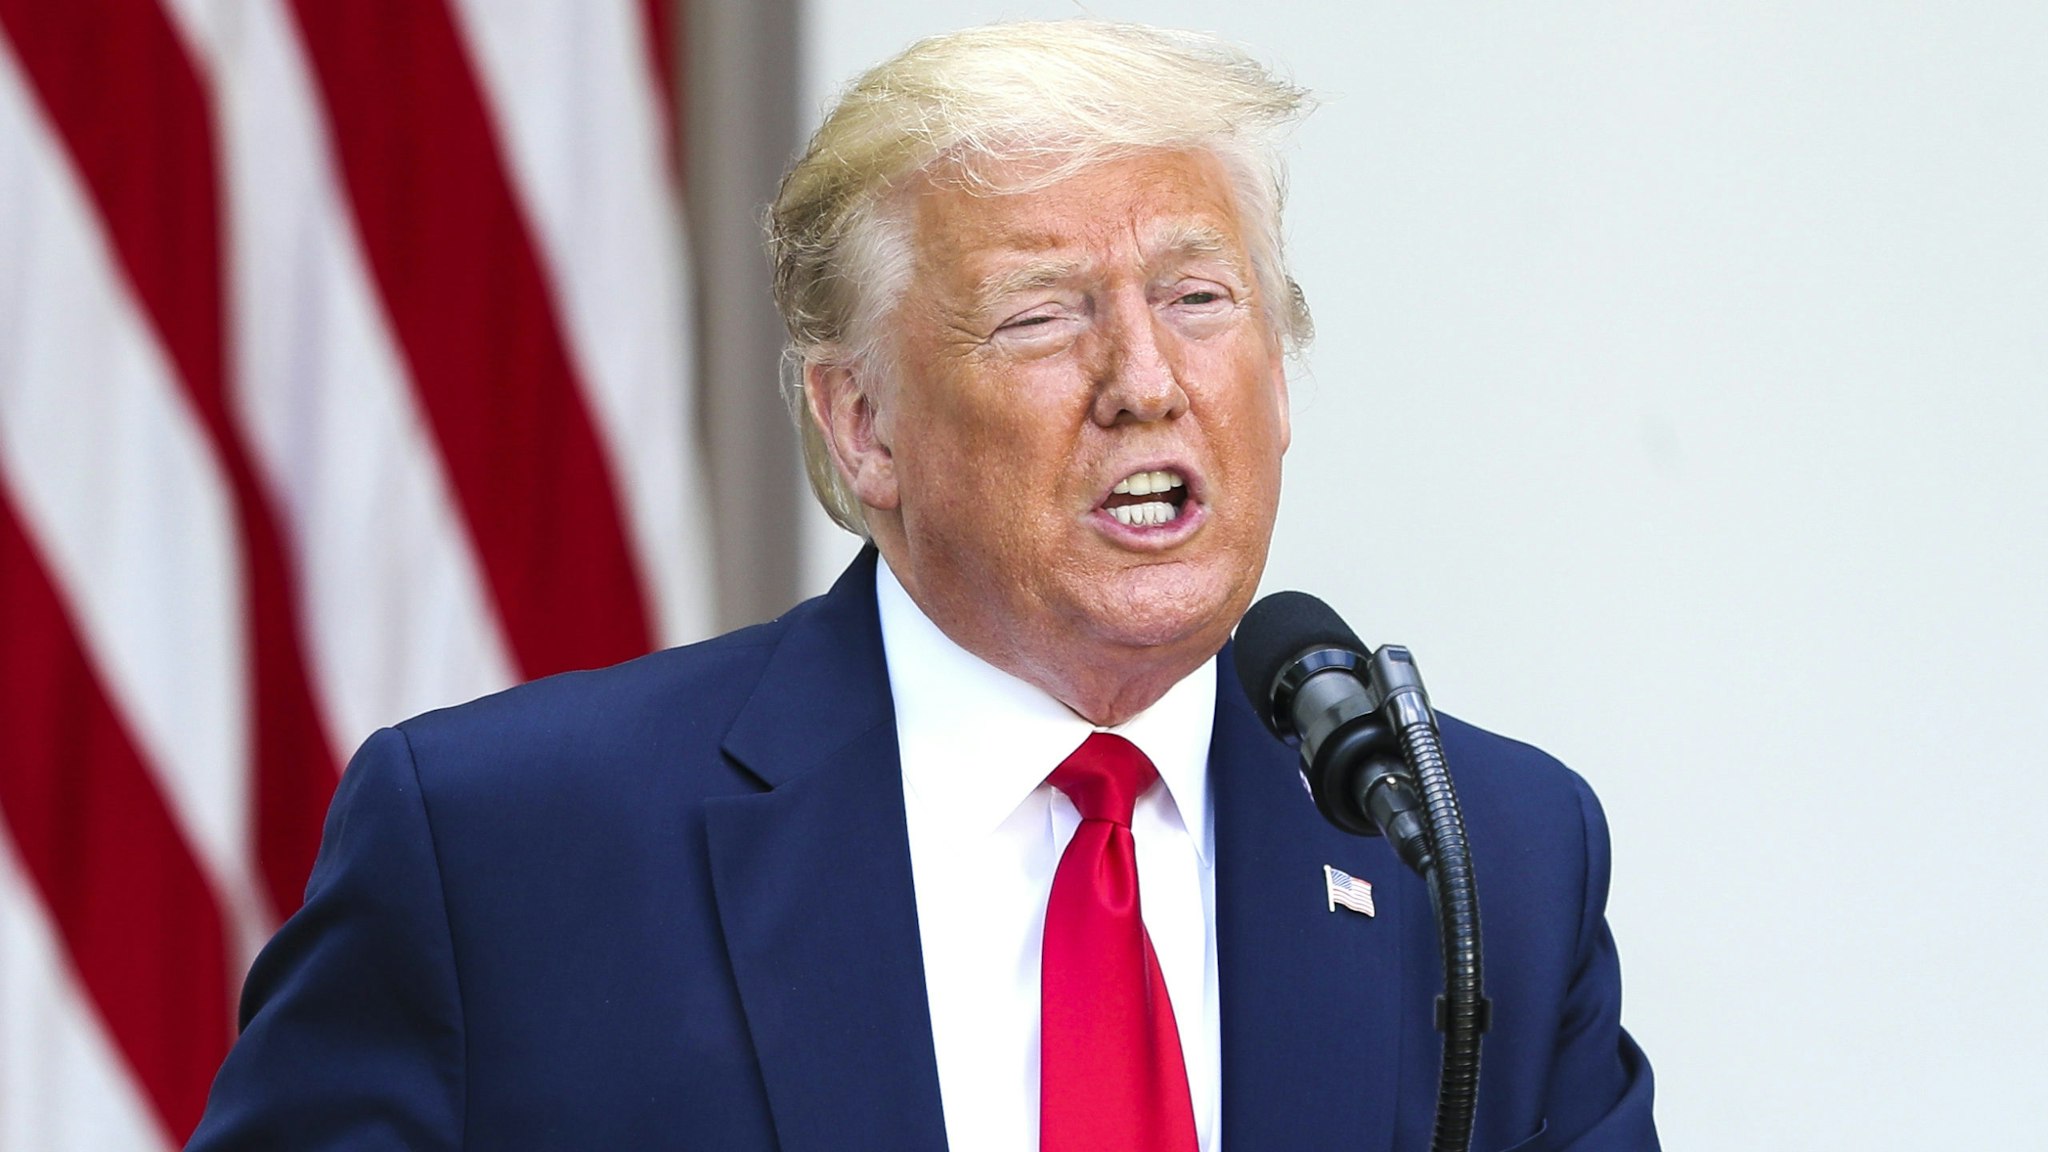 U.S. President Donald Trump speaks during a protecting seniors with diabetes event in the Rose Garden of the White House in Washington, D.C., U.S., on Tuesday, May 26, 2020. Over 1,700 Medicare prescription drugs and managed care plans have applied to participate in a Trump administration savings model that will mean seniors won't have to pay more than $35 per month for insulin, the CMS announced Tuesday.